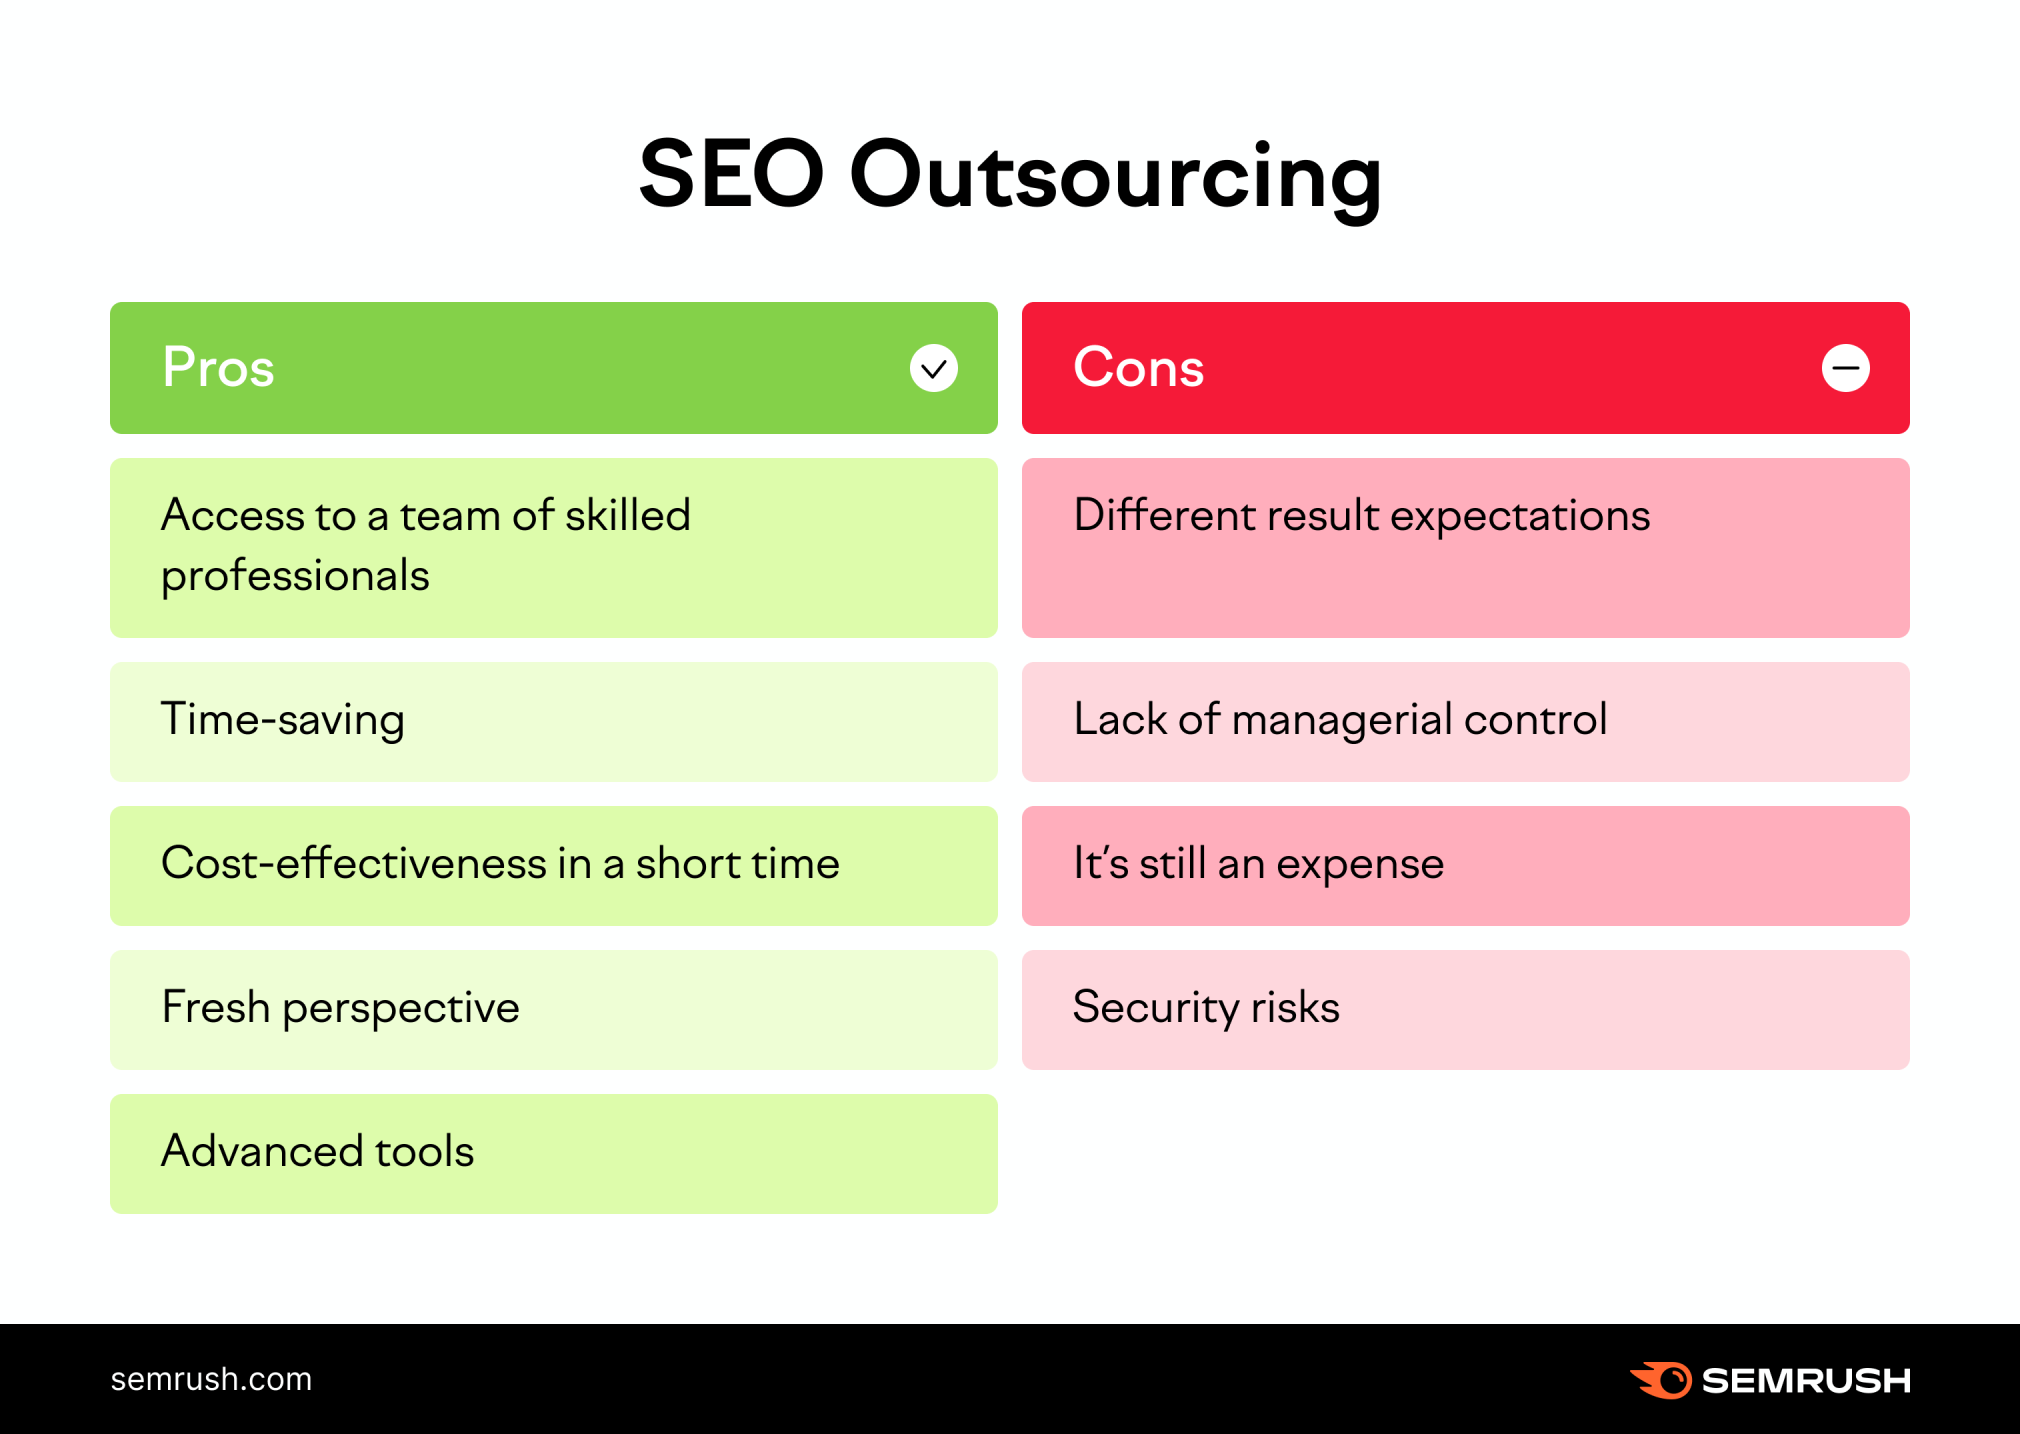 SEO outsourcing: Pros and Cons